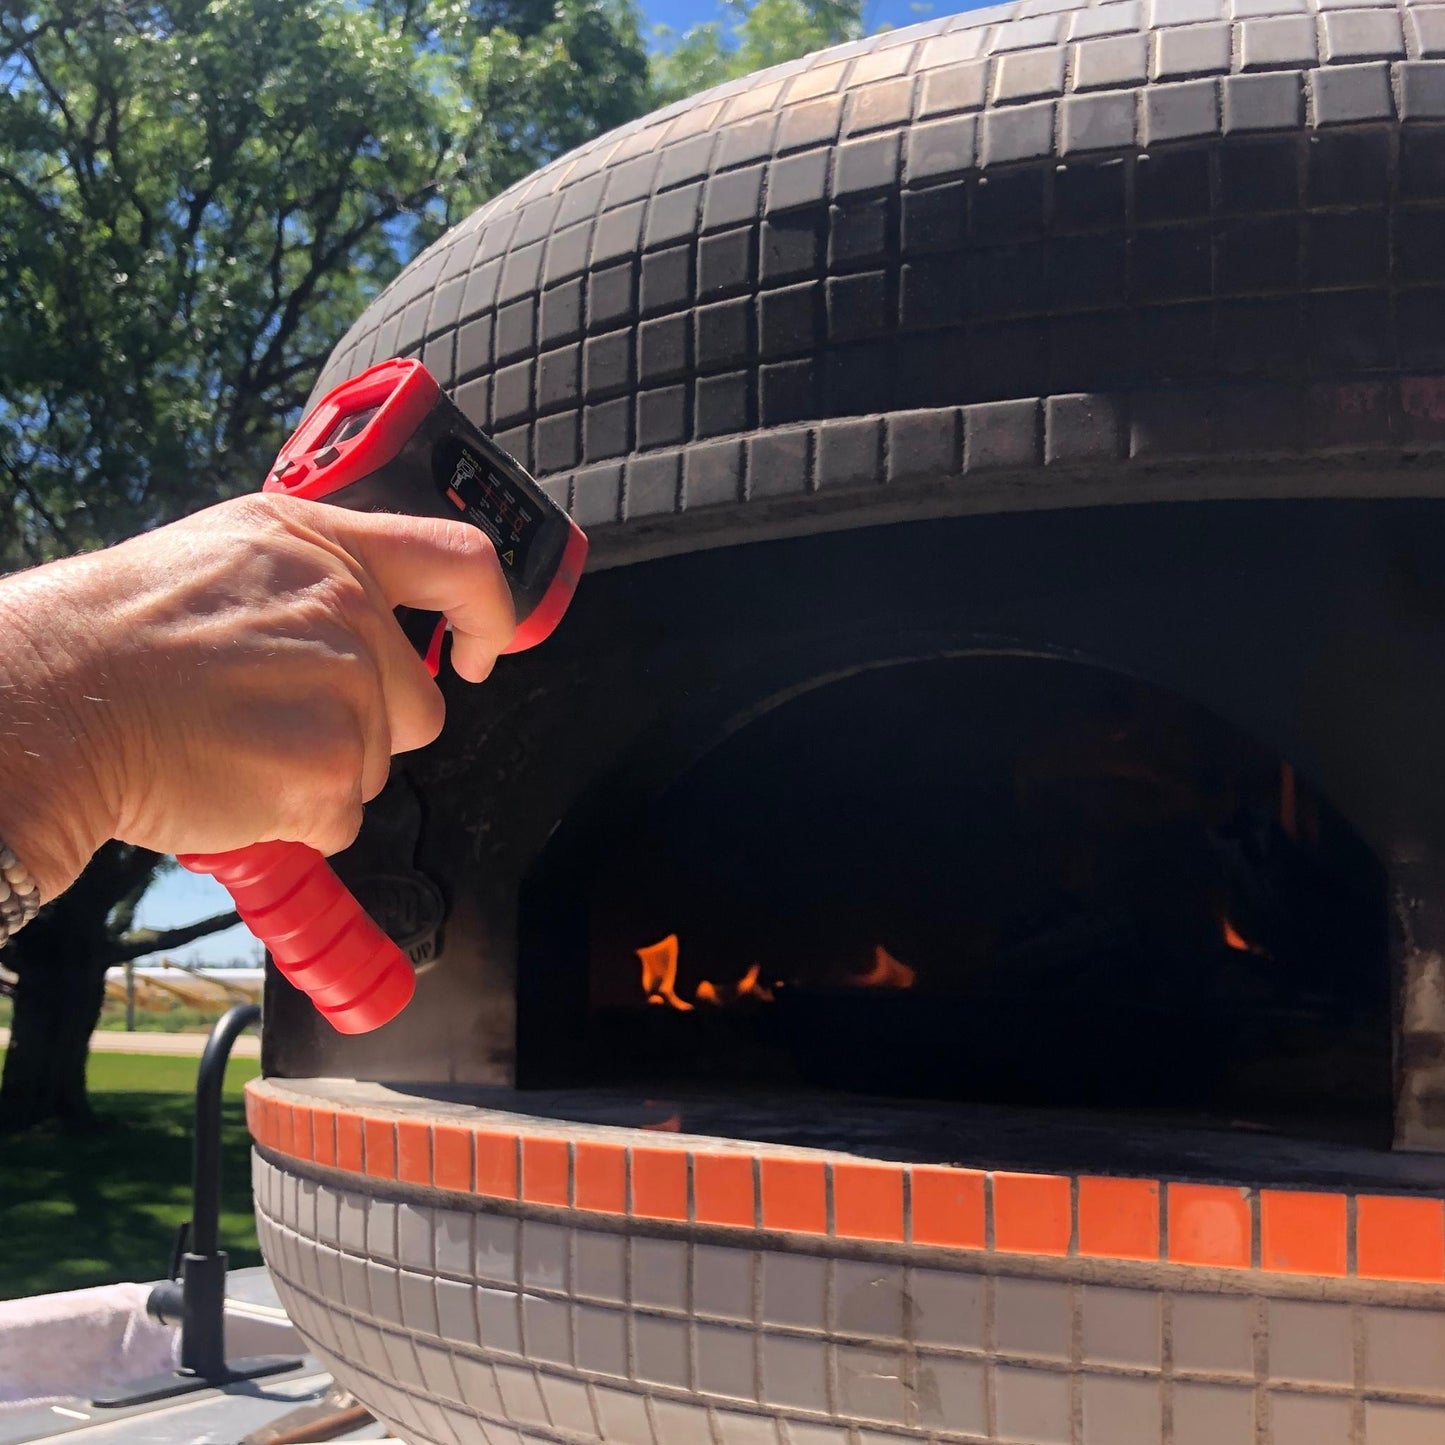 Temperature of the wood fired pizza oven - THERMOMETER 